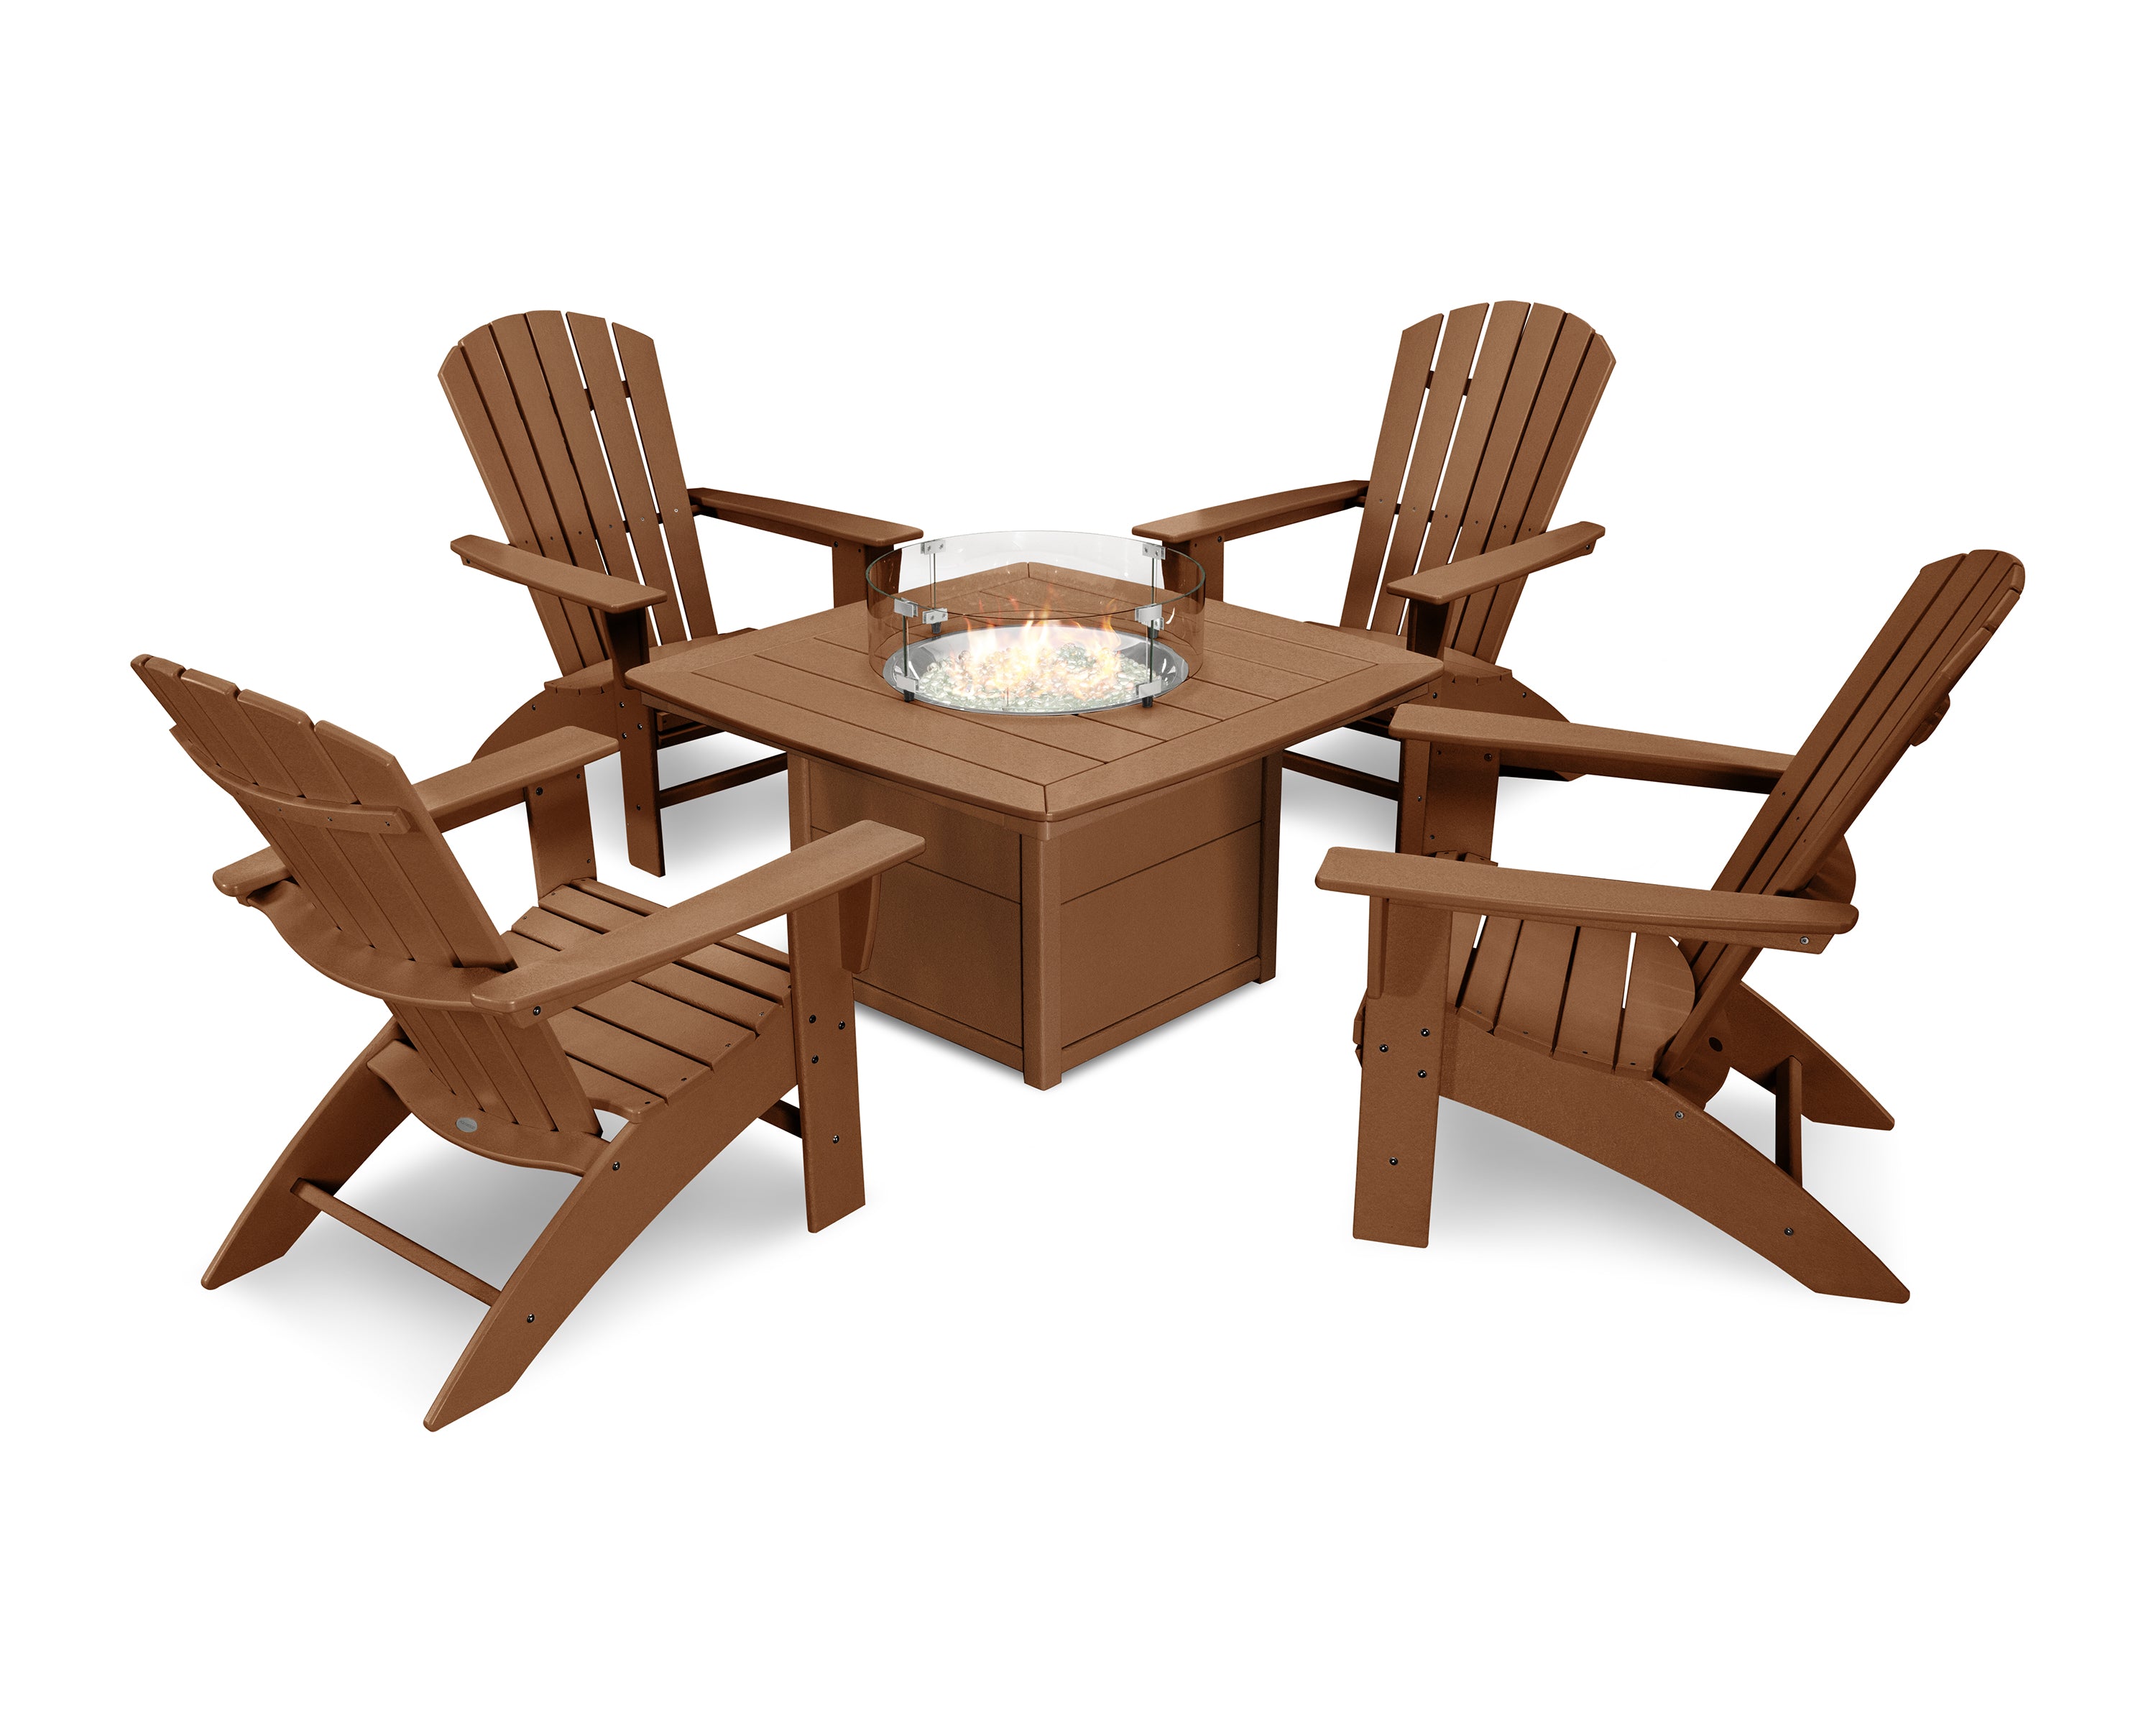 POLYWOOD® Nautical Curveback Adirondack 5-Piece Conversation Set with Fire Pit Table in Teak